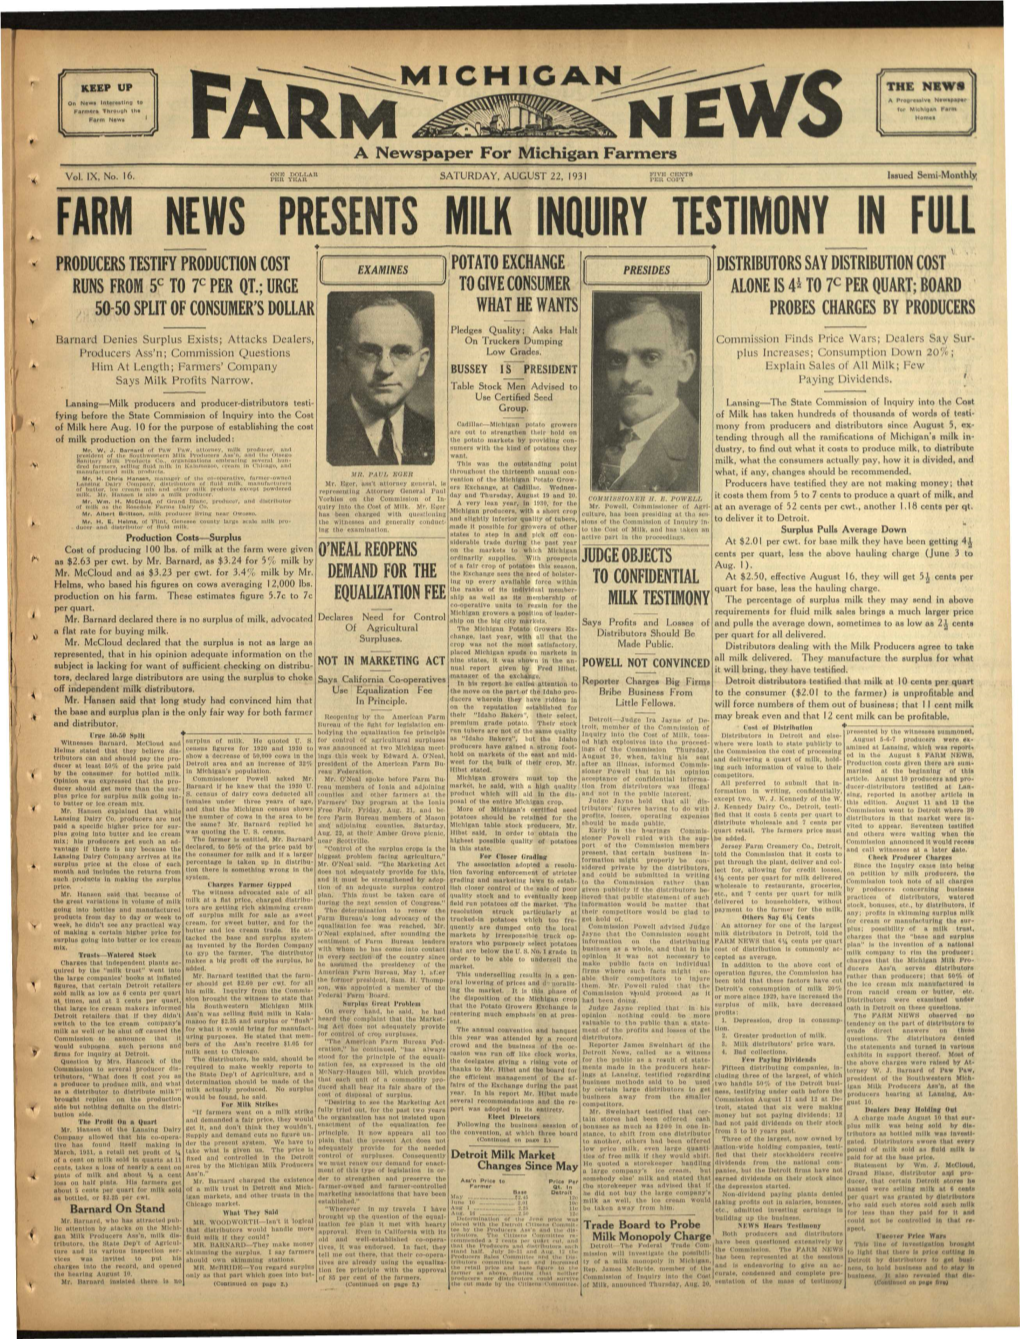 MICHIGAN the NEWS on News Interesting to a Progressive Newspaper Farmers Through the for Michigan Farm Farm News FARM Homes a Newspaper for Michigan Farmers